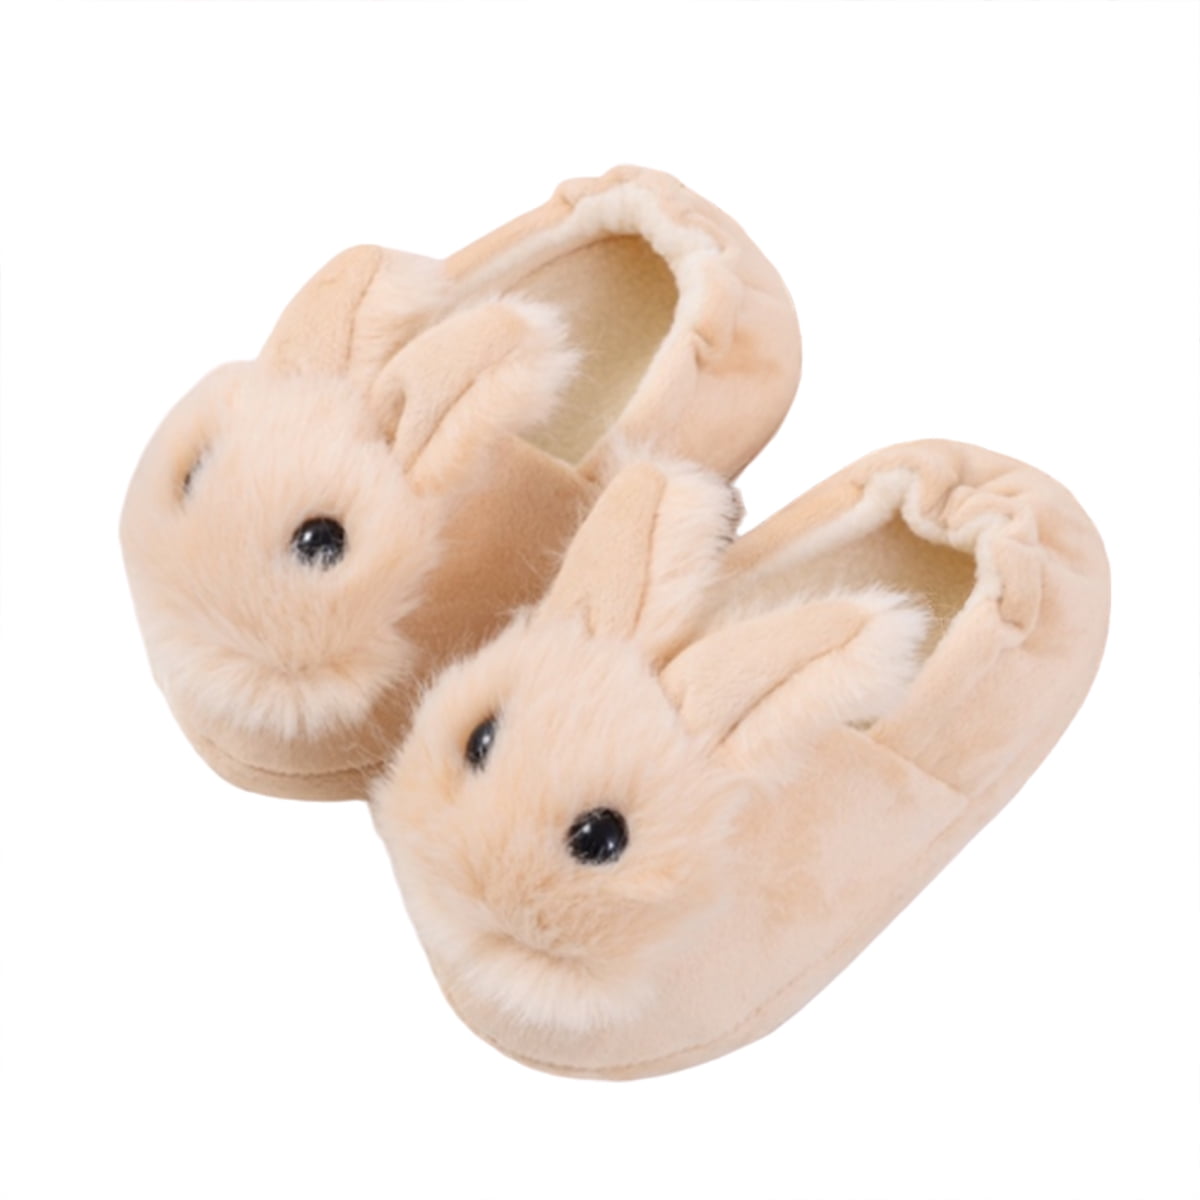 Toddler Baby Plush Slippers, Soft Bunny Winter Warm House Bedroom Shoes ...